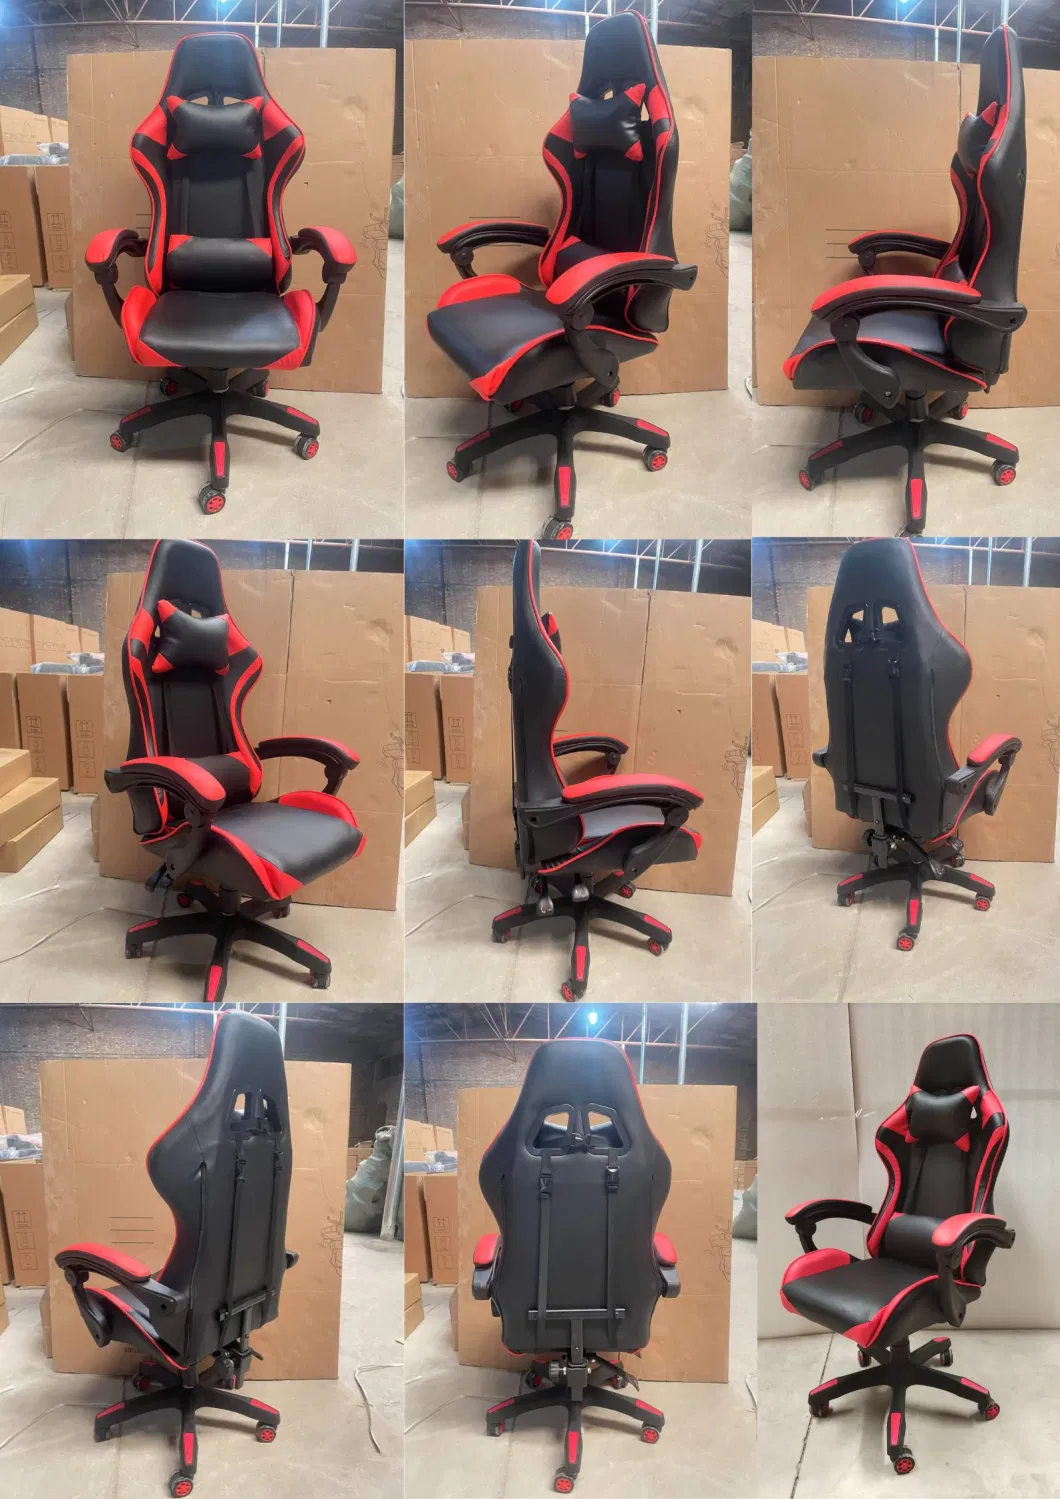 2023 Cheapest Gaming Chair Adjustable Height Ergonomic Comfortable for Gamer Computer Black and Red Gaming Chair